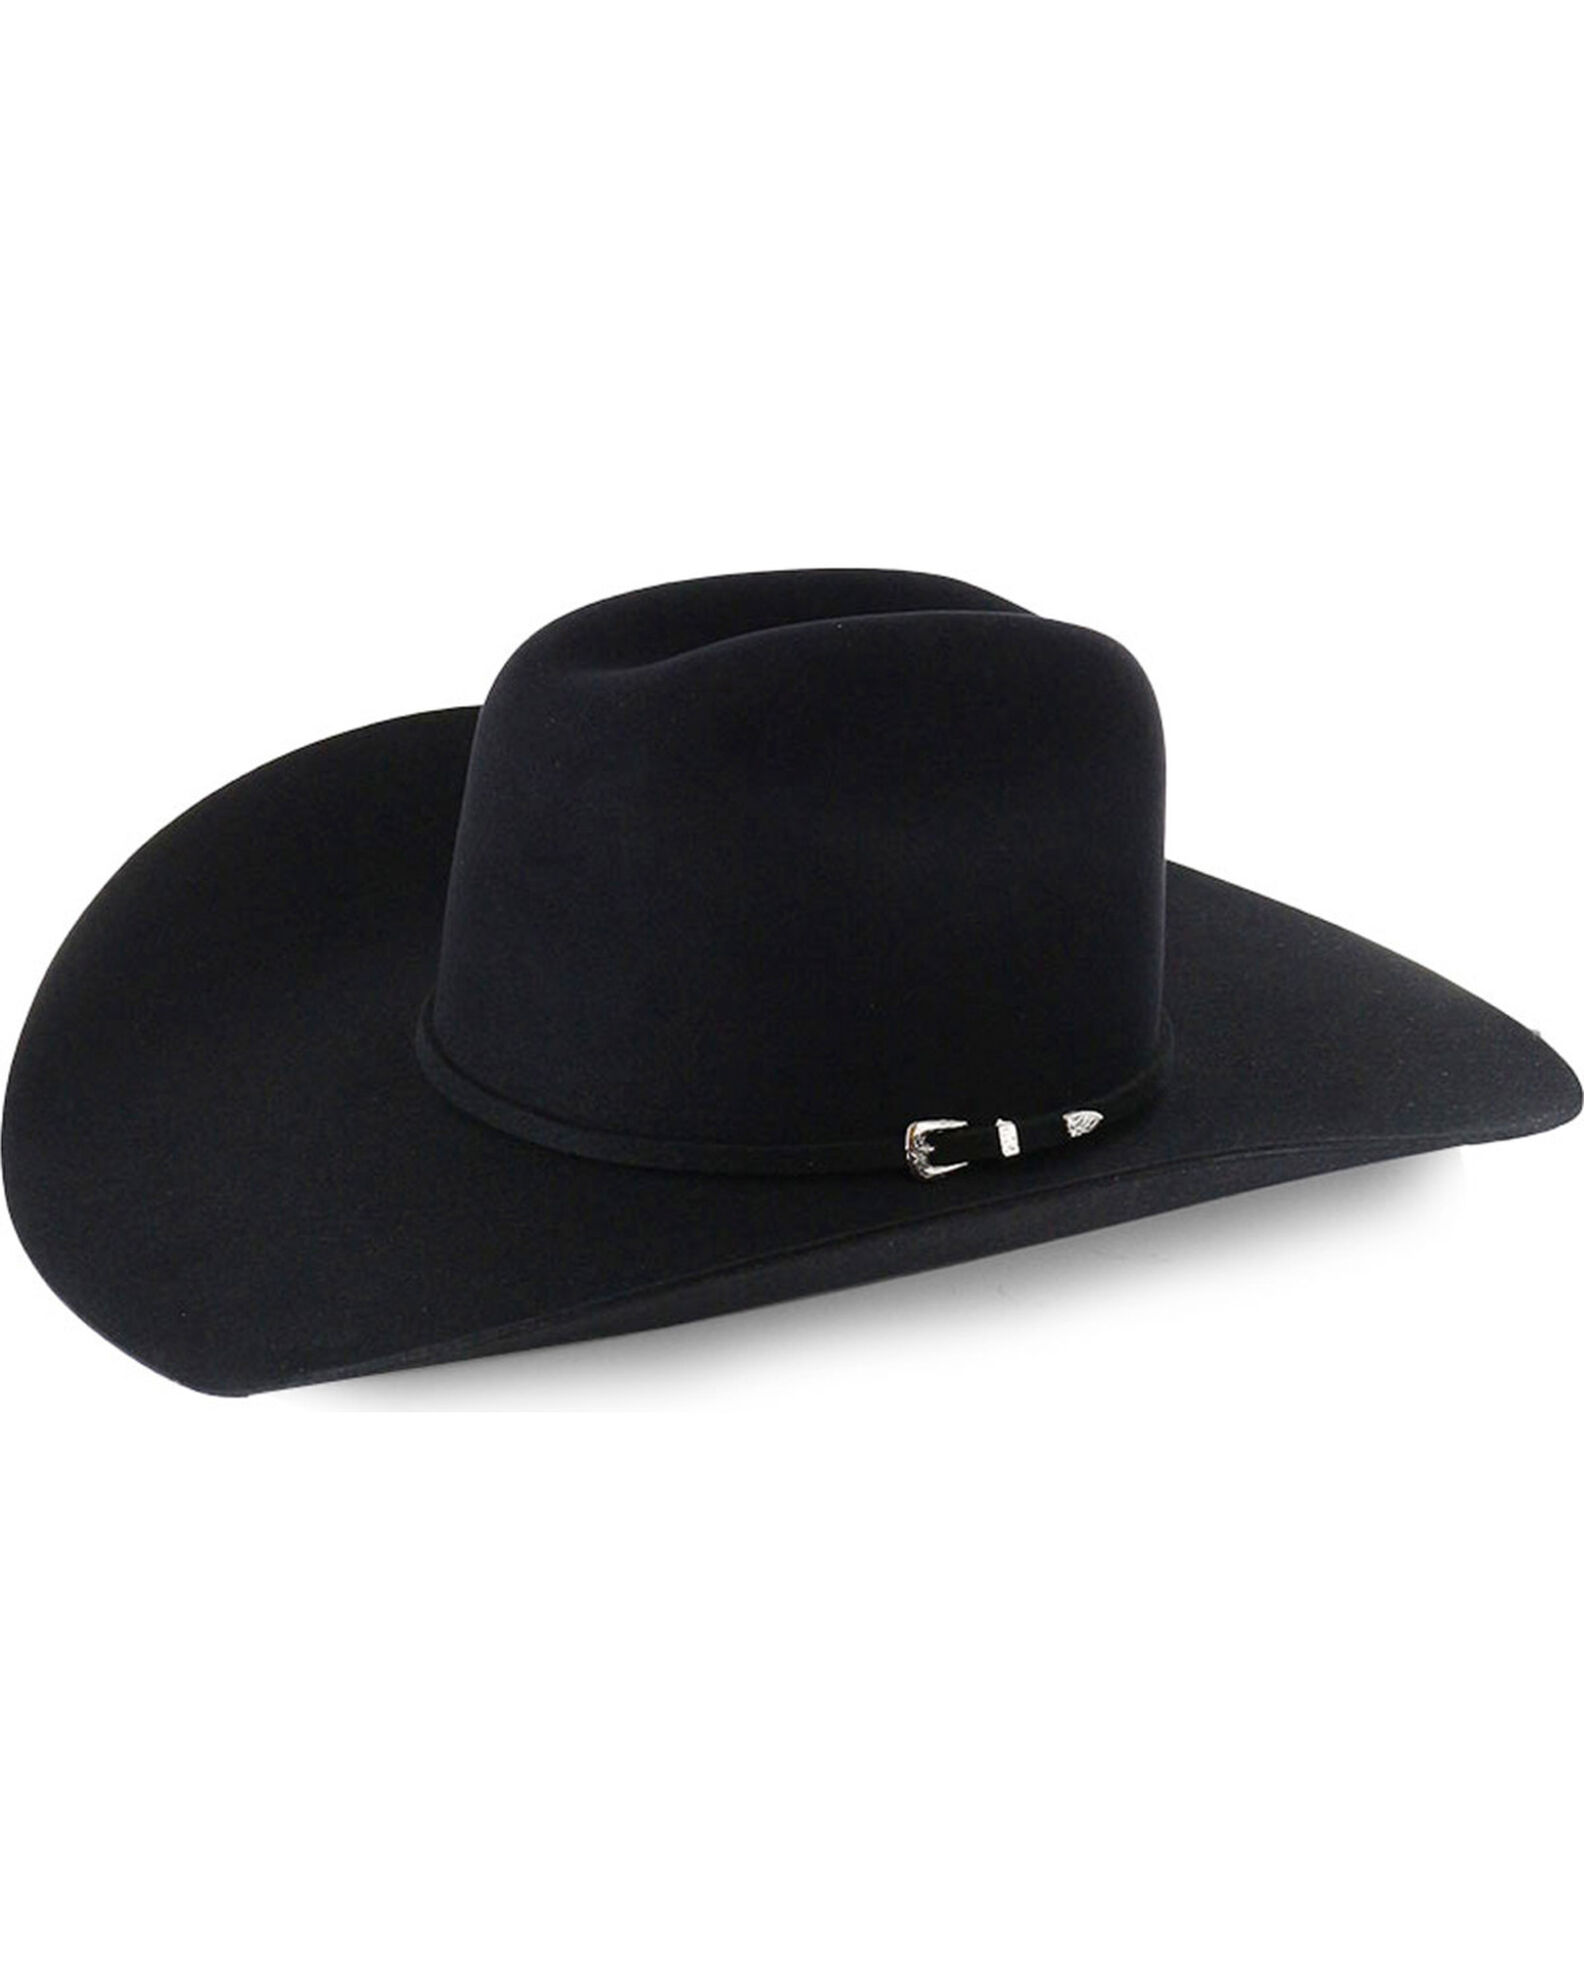 Rodeo King  Black 7X Felt Cowboy Hat – Outpost Western Store